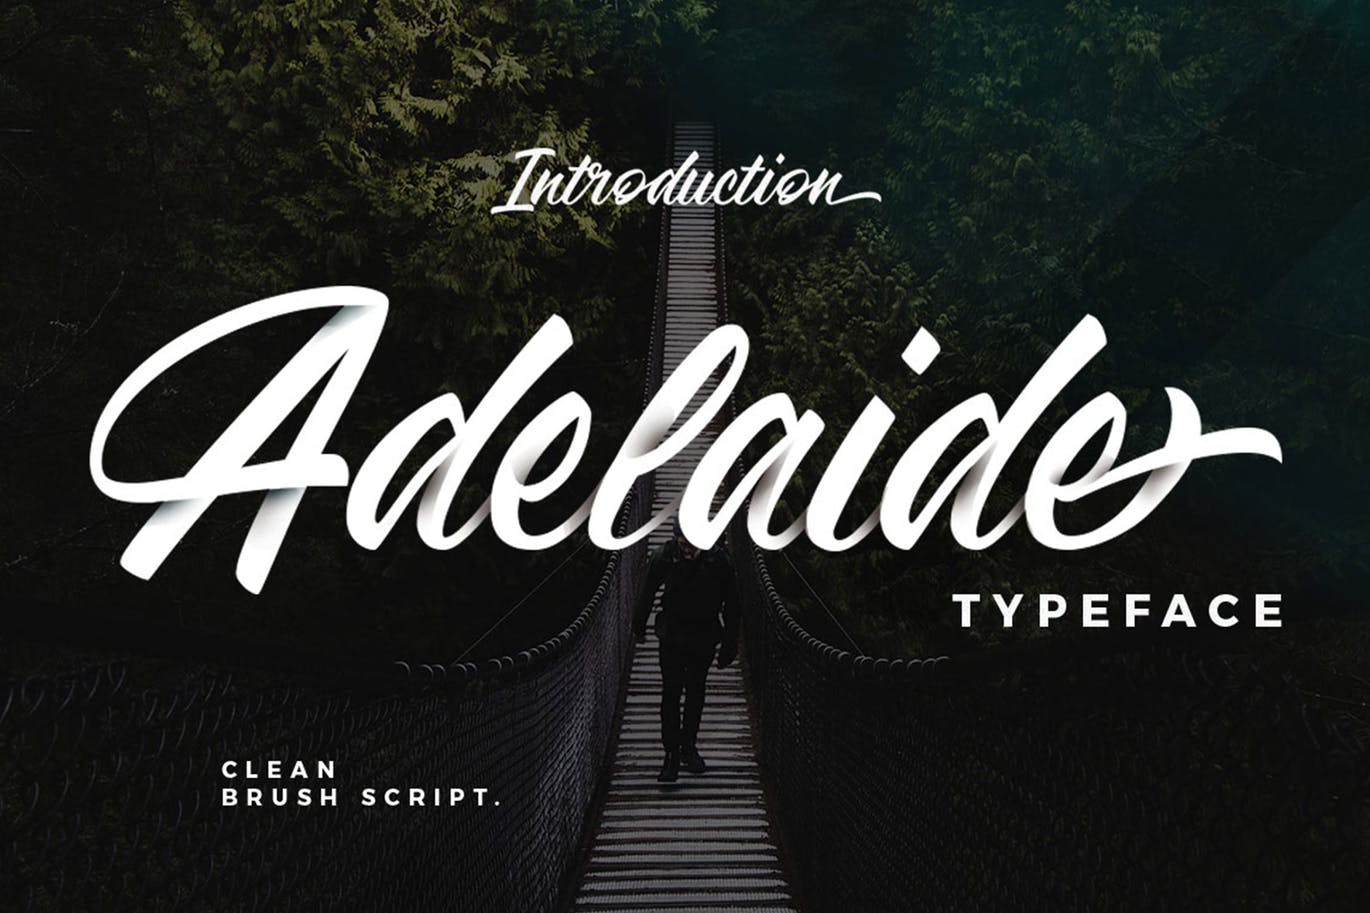 Adelaide typeface for clean logos